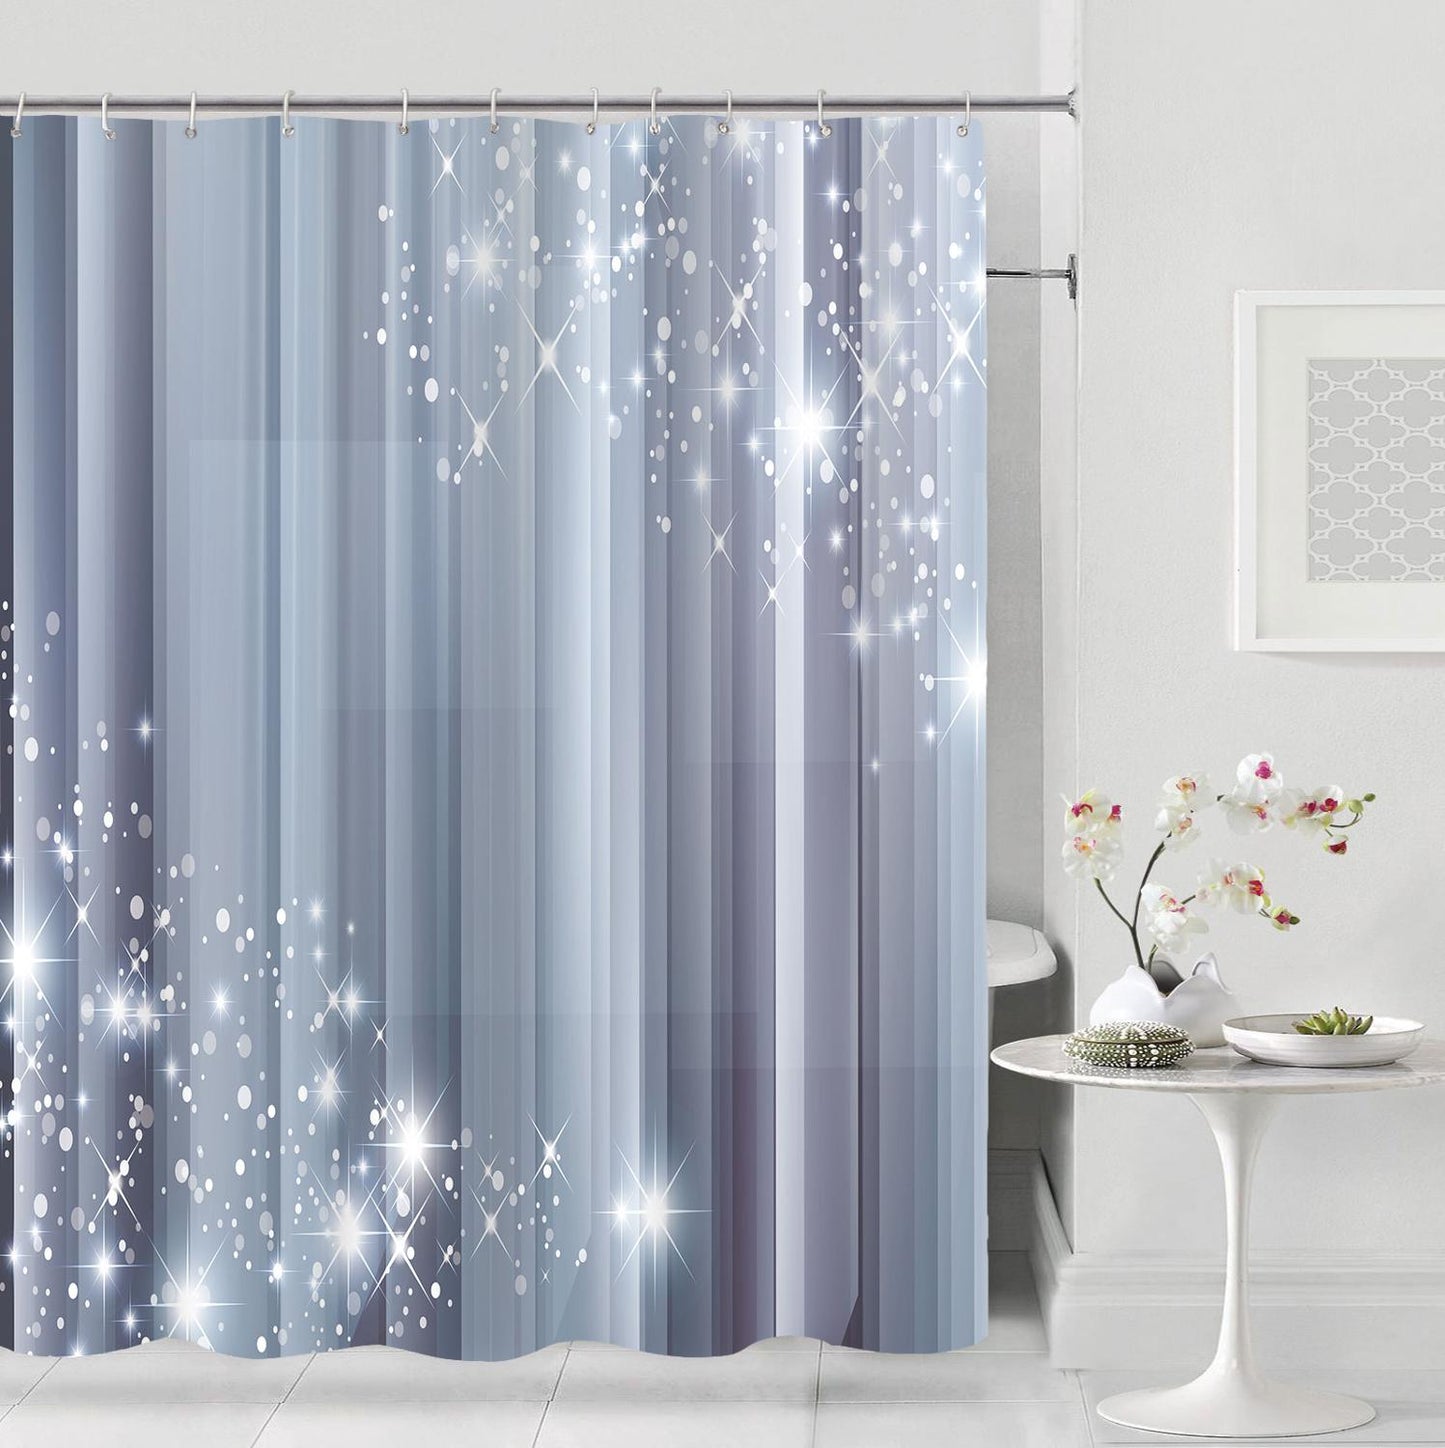 Modern shower curtain Fashion Shiny Shower Curtains Polyester Fabric Waterproof Bath Curtains Bathroom Partition curtain 12 hook